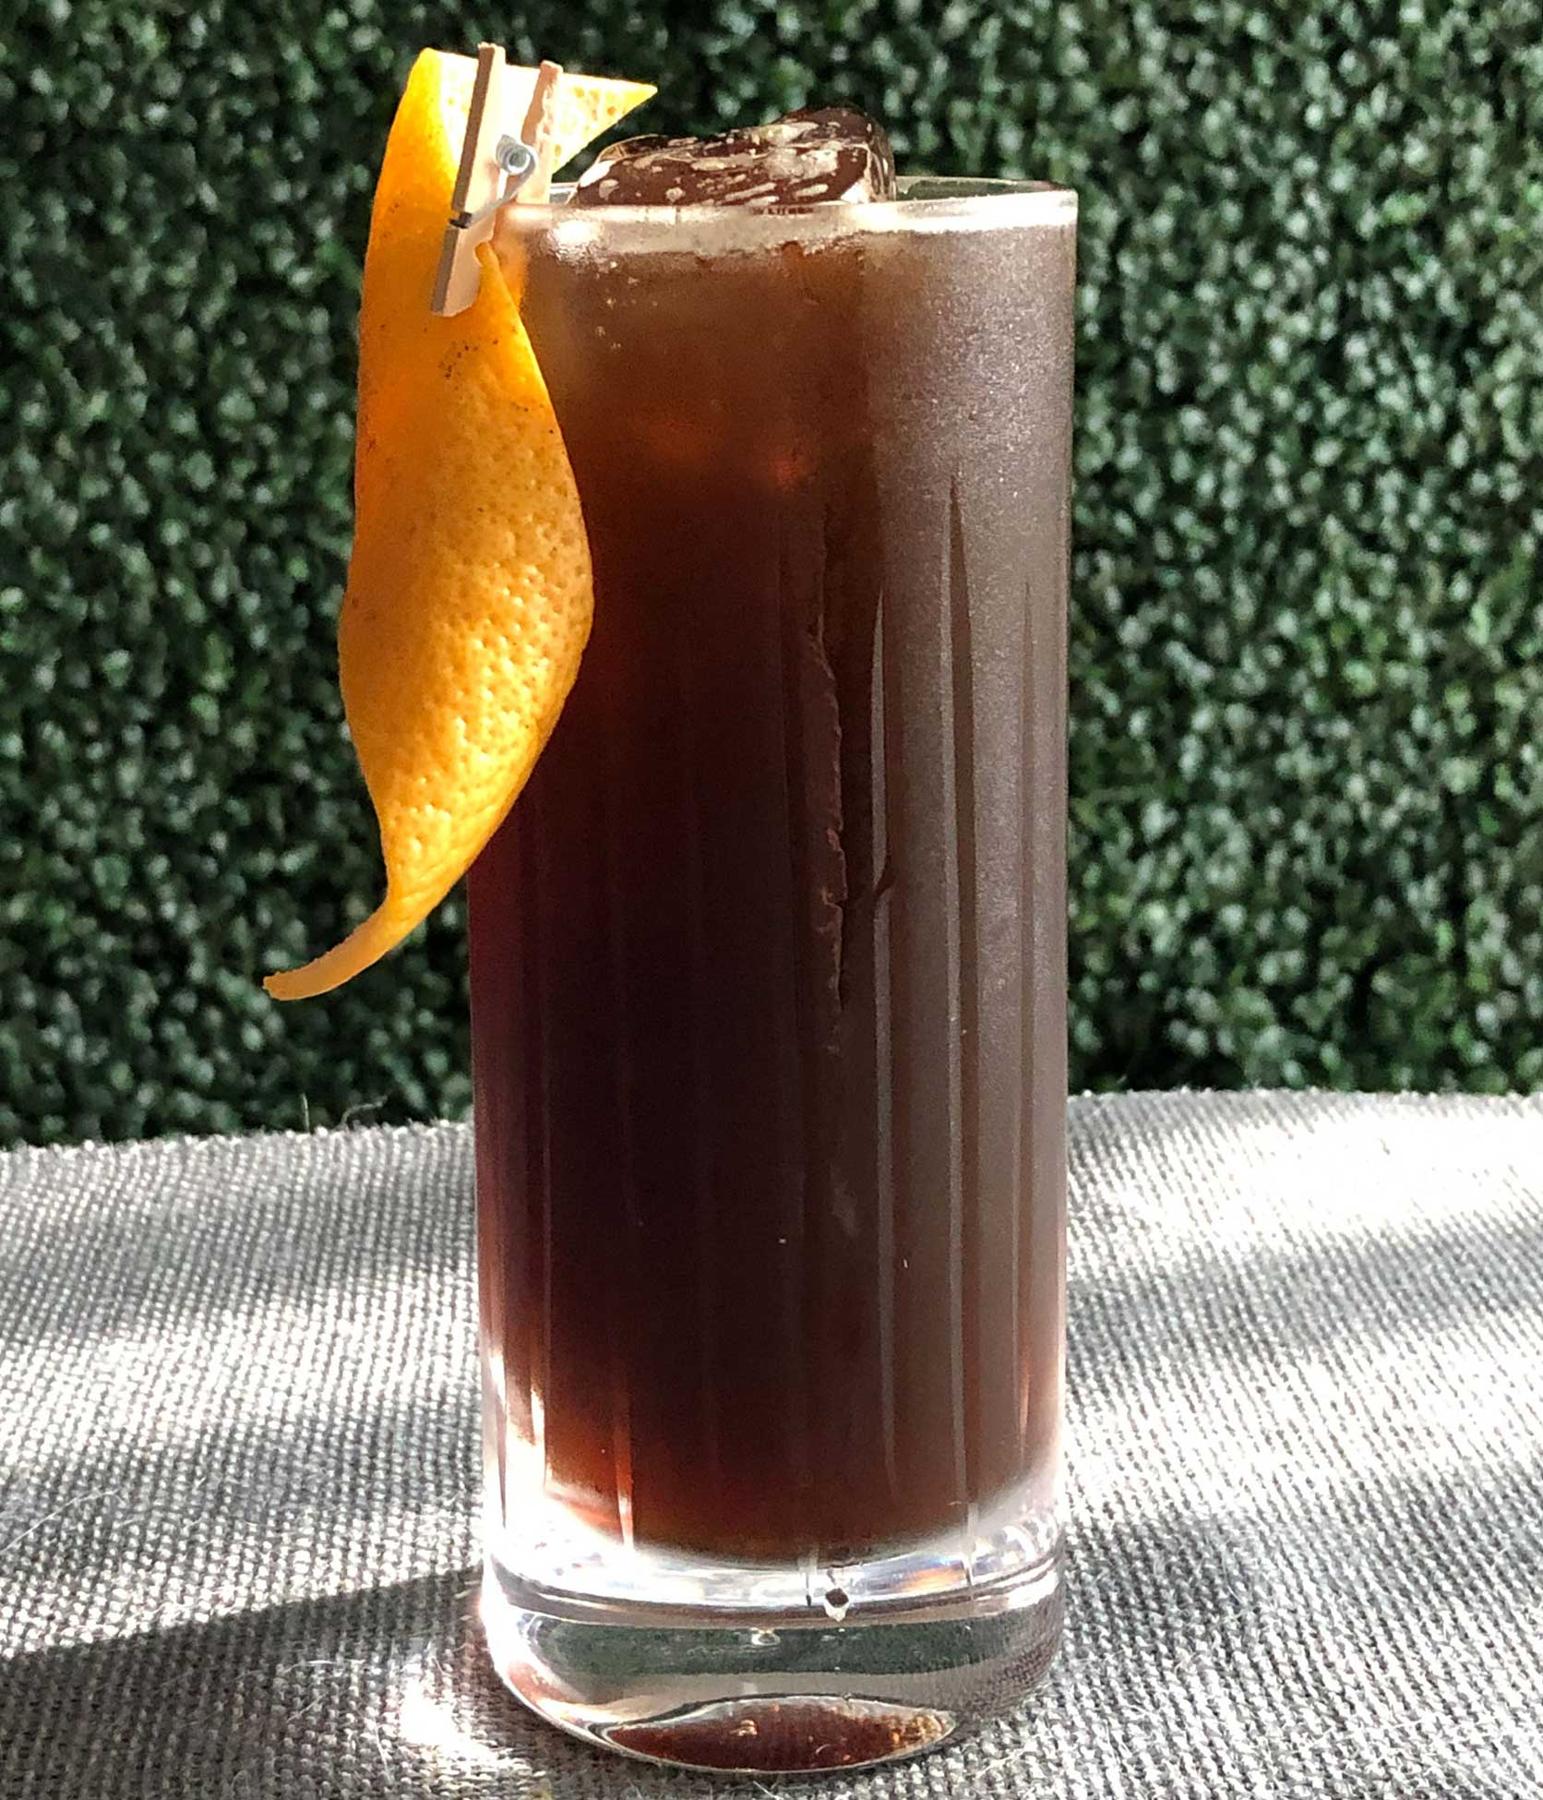 An example of the Poker Face, the mixed drink (drink) featuring Fentimans Curiosity Cola, Elisir Novasalus, Salers Gentian Apéritif, Zirbenz Stone Pine Liqueur of the Alps, and grapefruit twist; photo by Lee Edwards